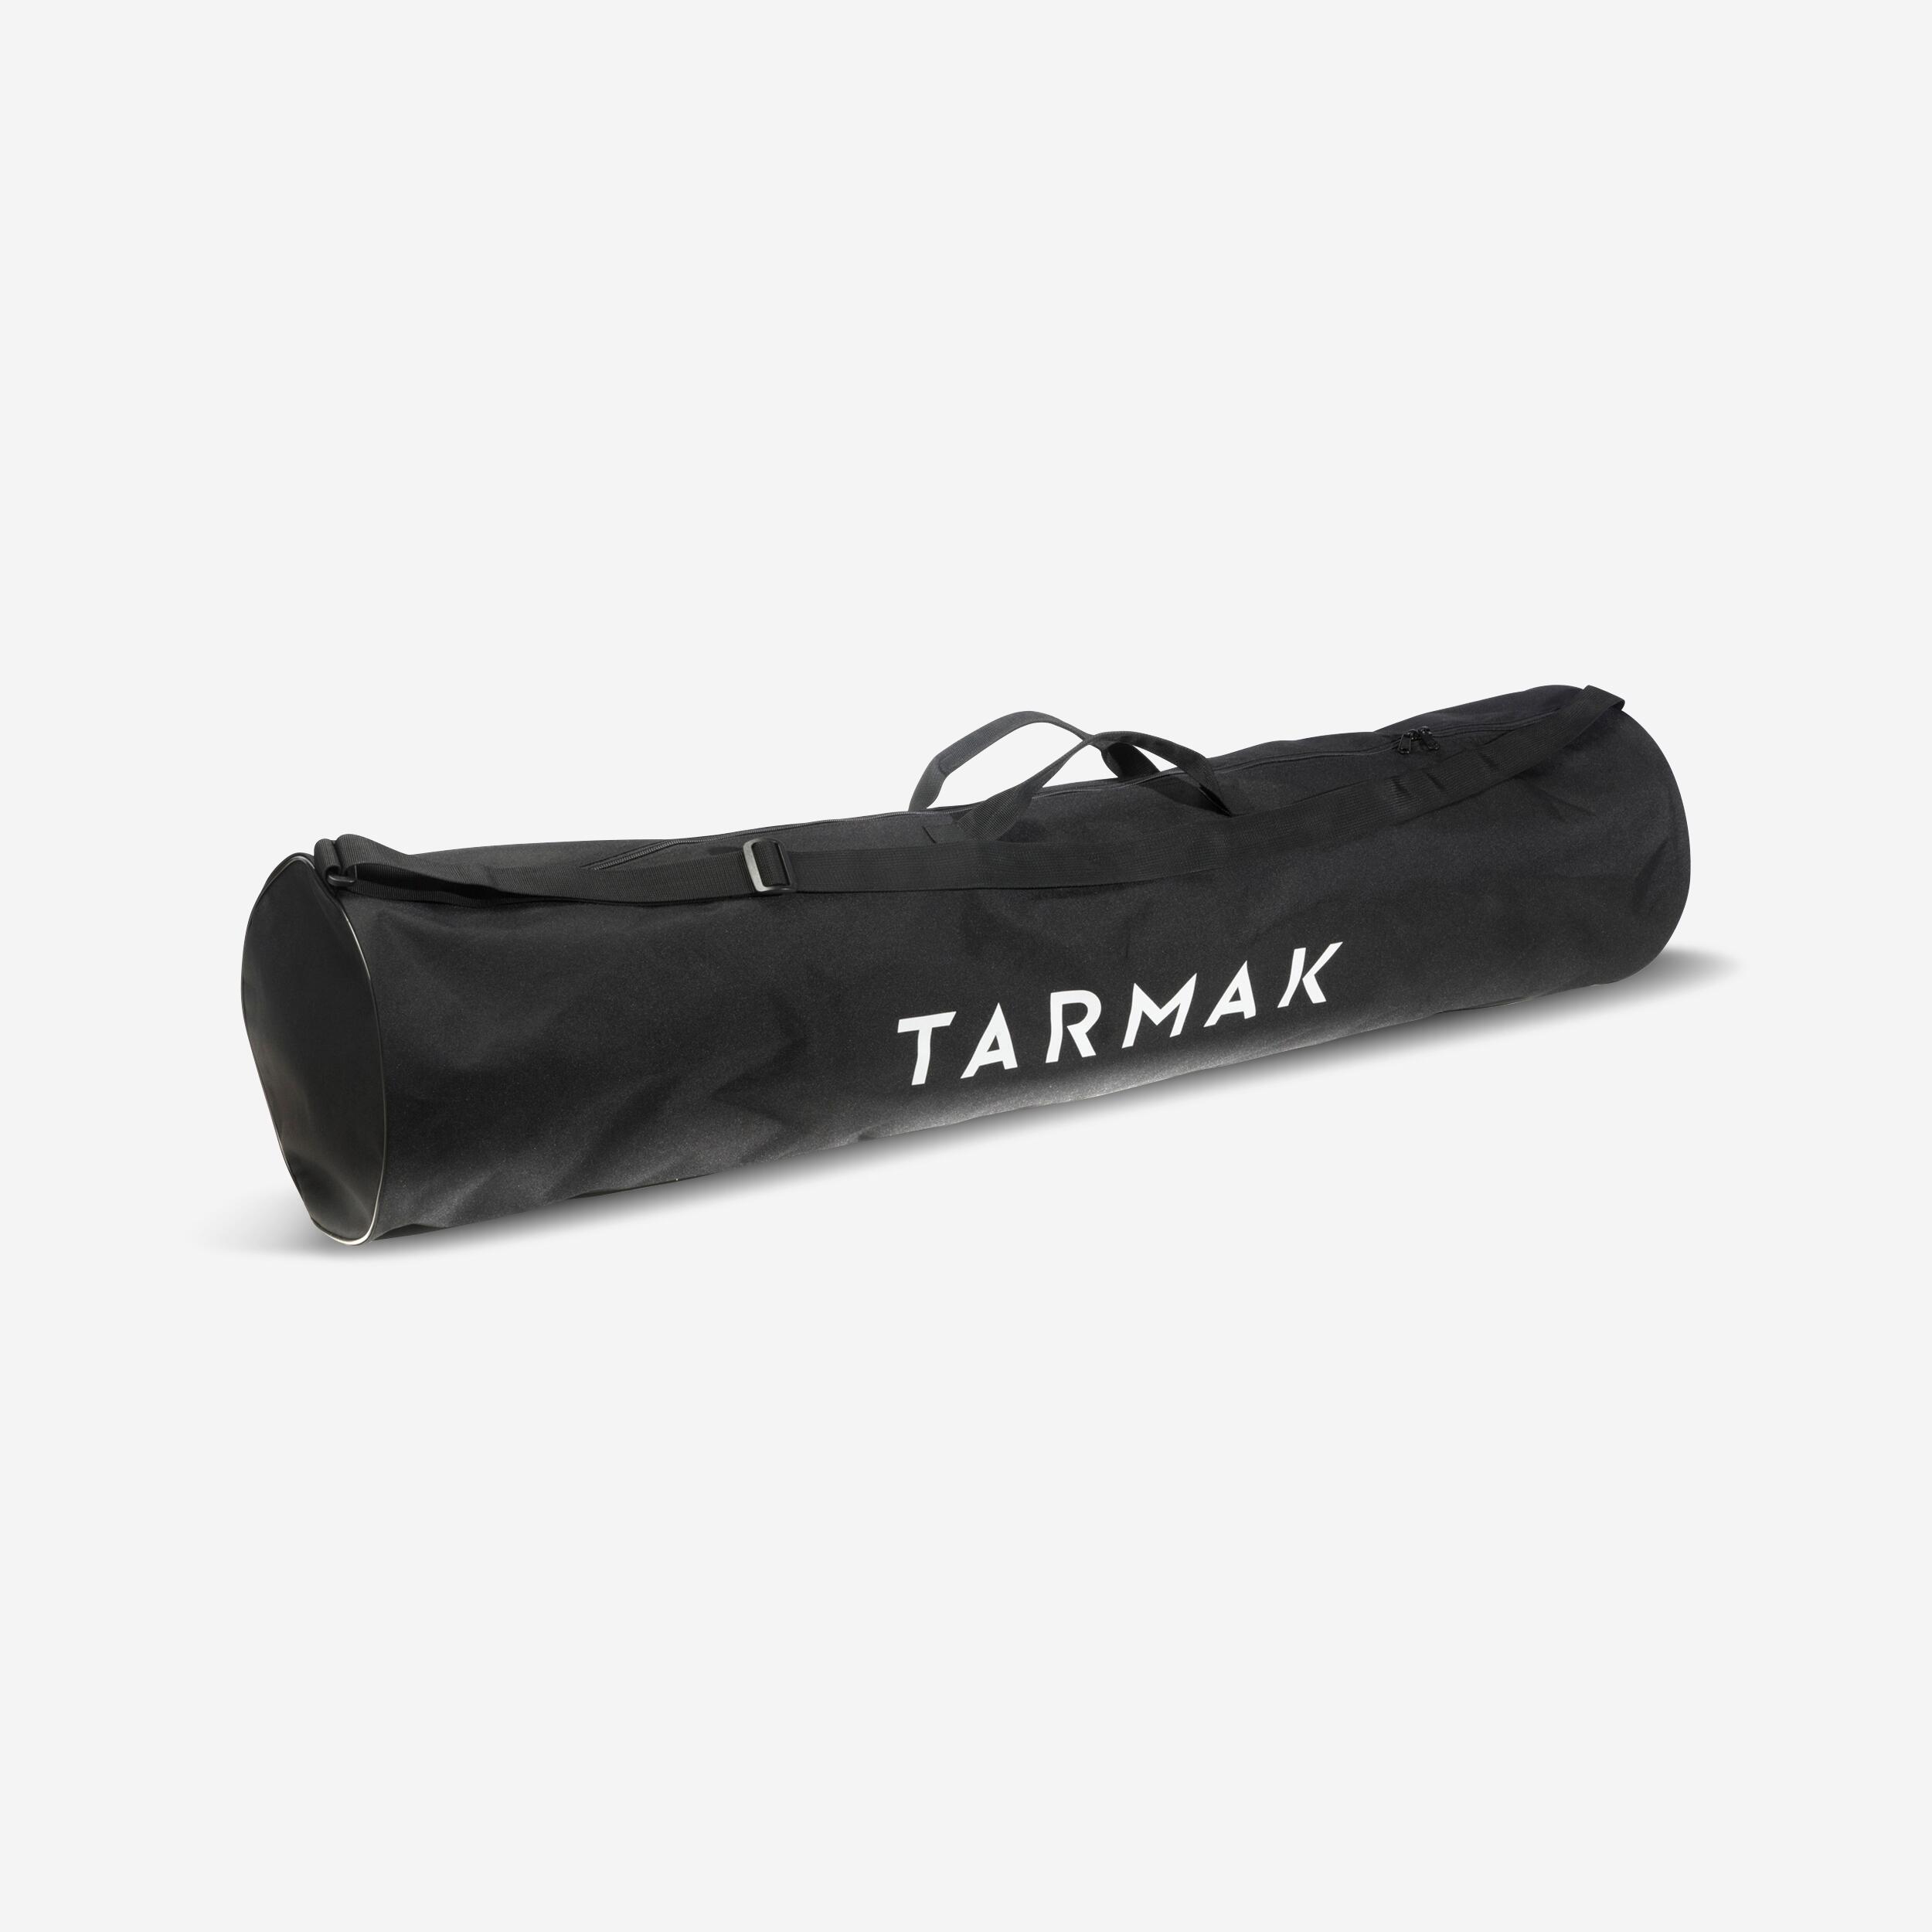 TARMAK Robust basketball bag for carrying up to five balls (sizes 5 to 7).